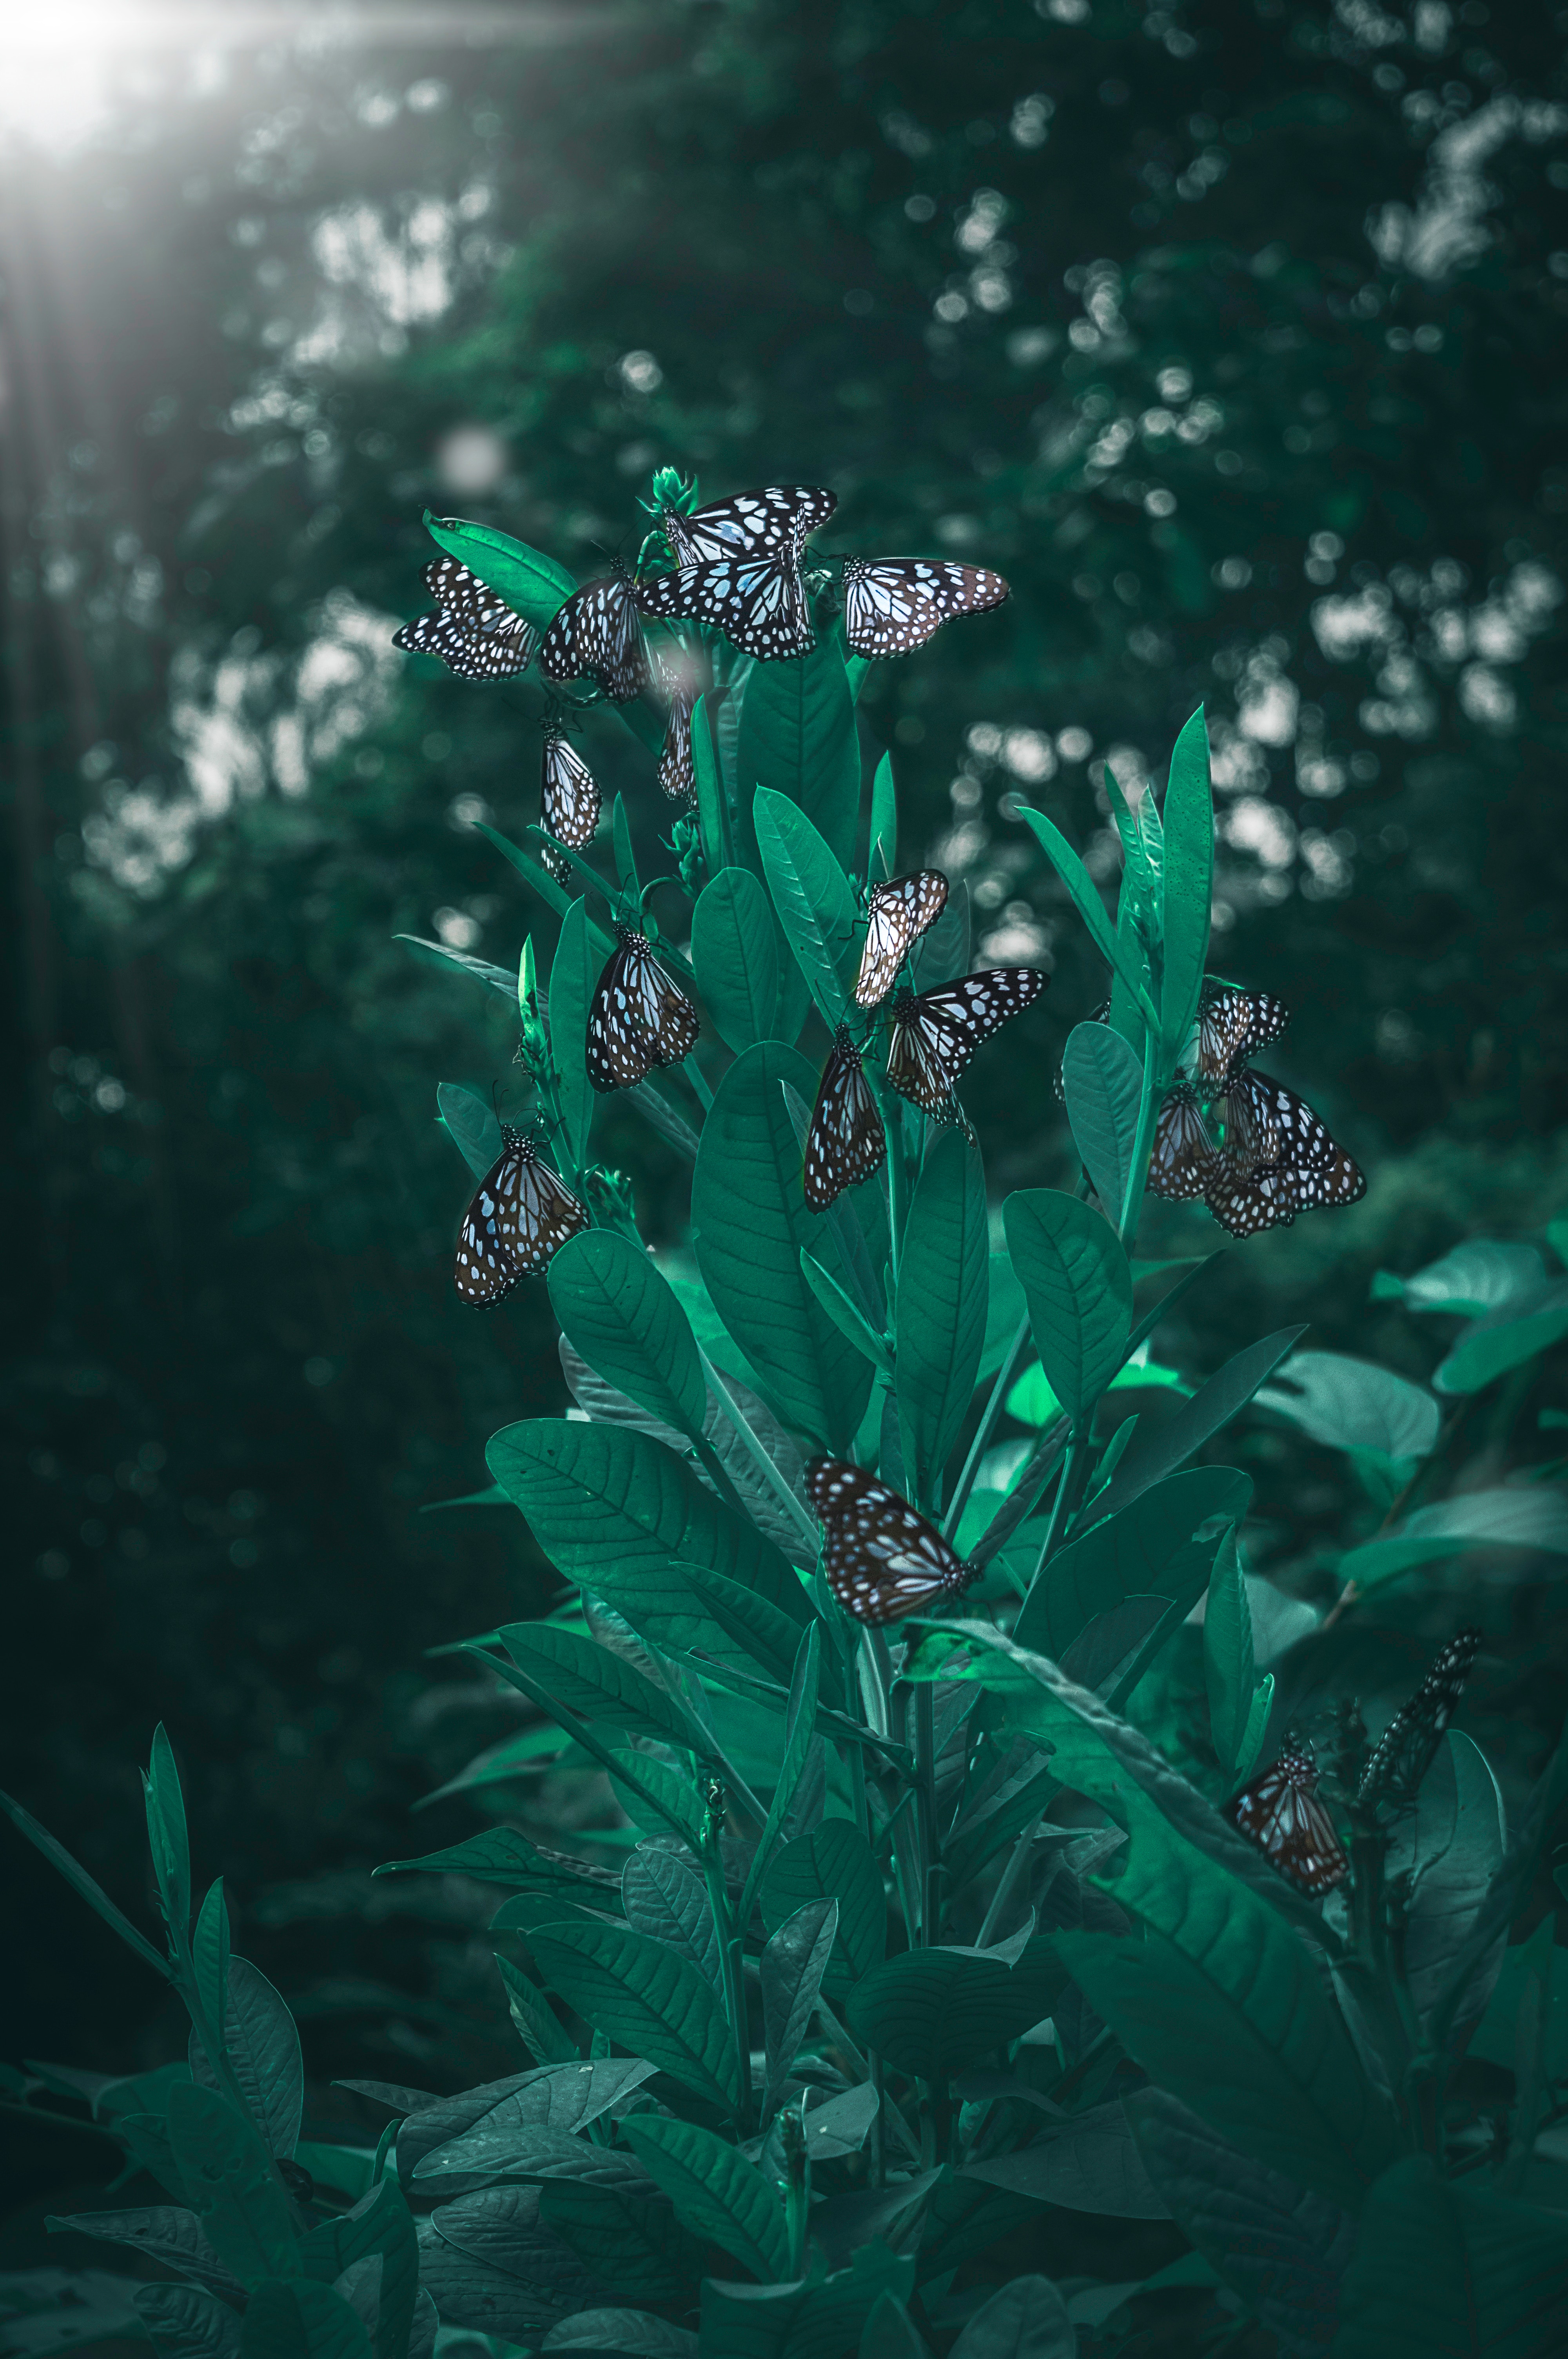 butterflies, smooth, leaves, plant, macro, blur lock screen backgrounds